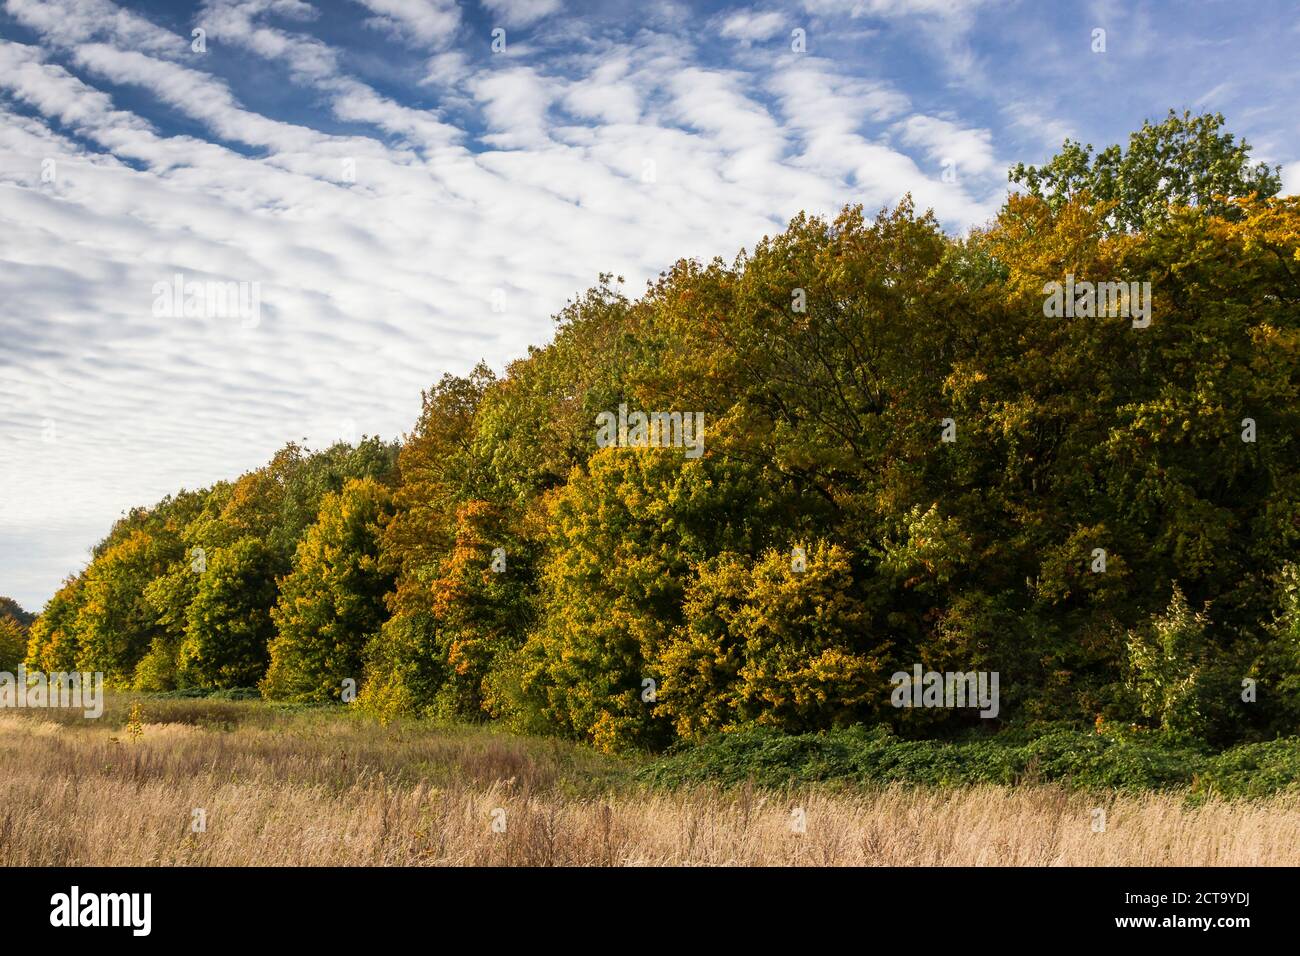 Germany, Brodten, Autumnal trees Stock Photo